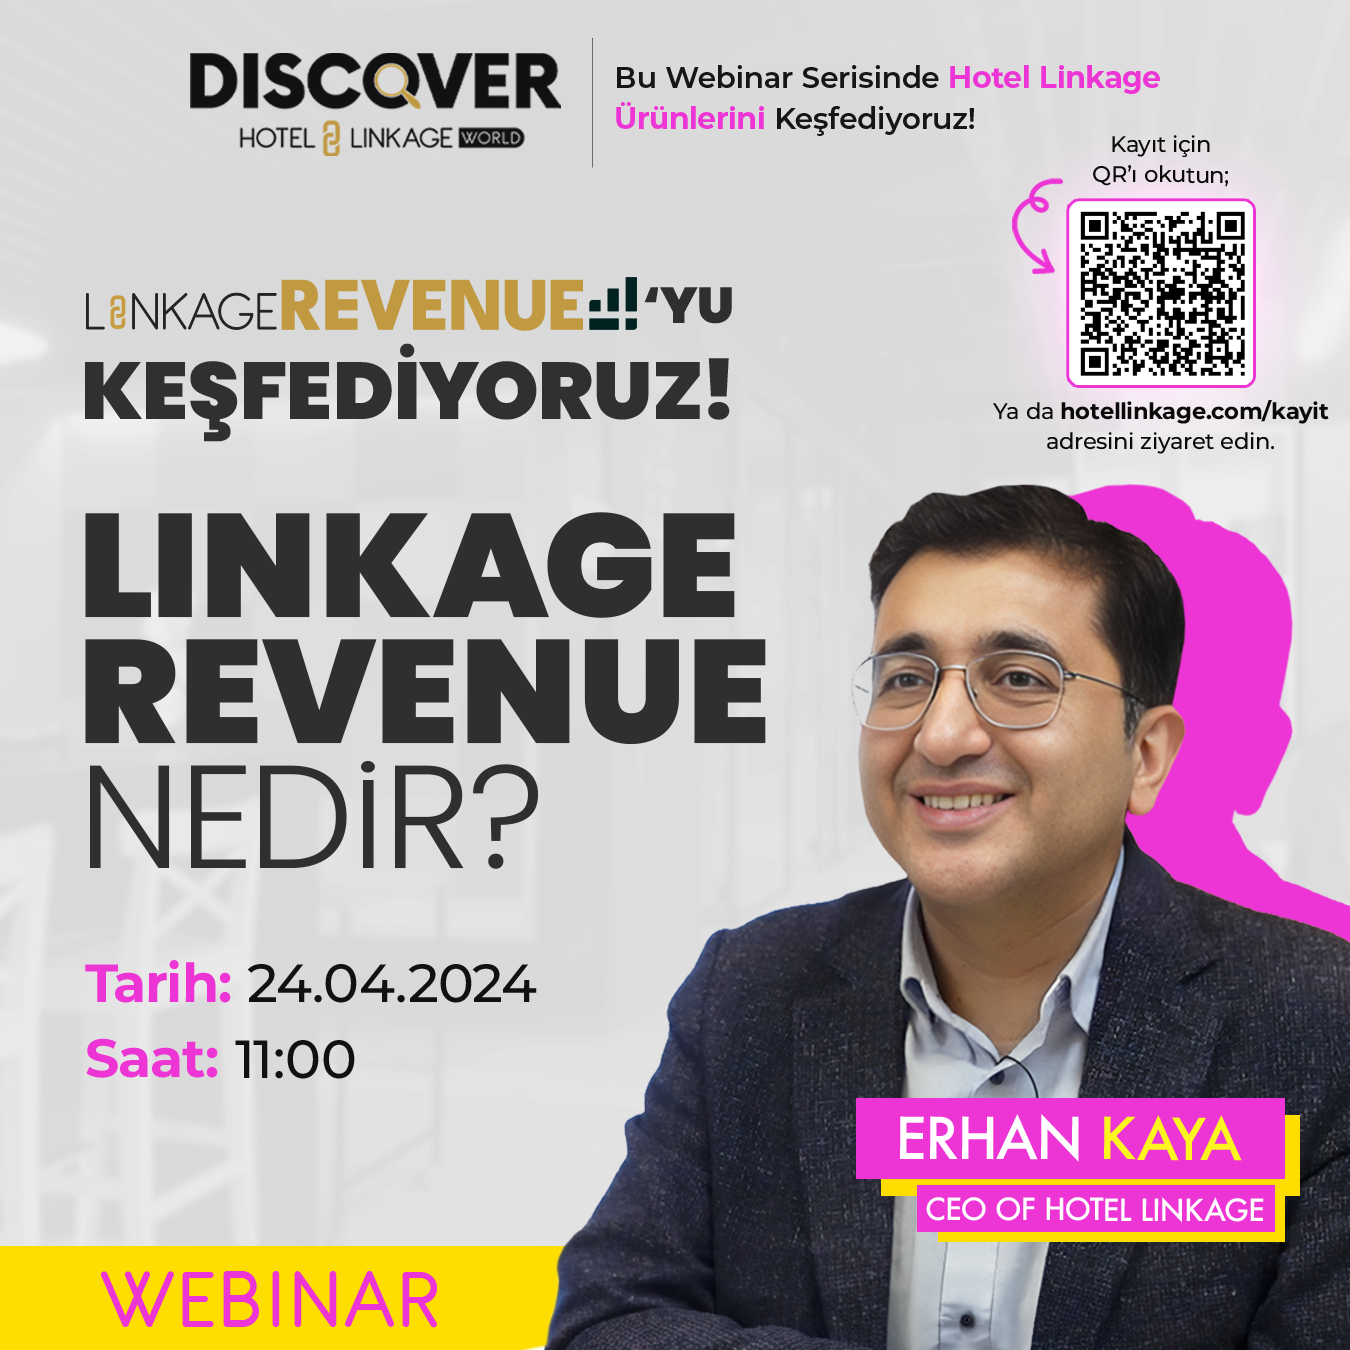 Promotional poster for the 'Discover Hotel Linkage' webinar scheduled for March 14, 2024, at 8:00 PM. The poster features a photo of Erhan Kaya, CEO of Hotel Linkage, along with the event title 'WHAT IS LINKAGE CRS?', registration information, and a QR code.